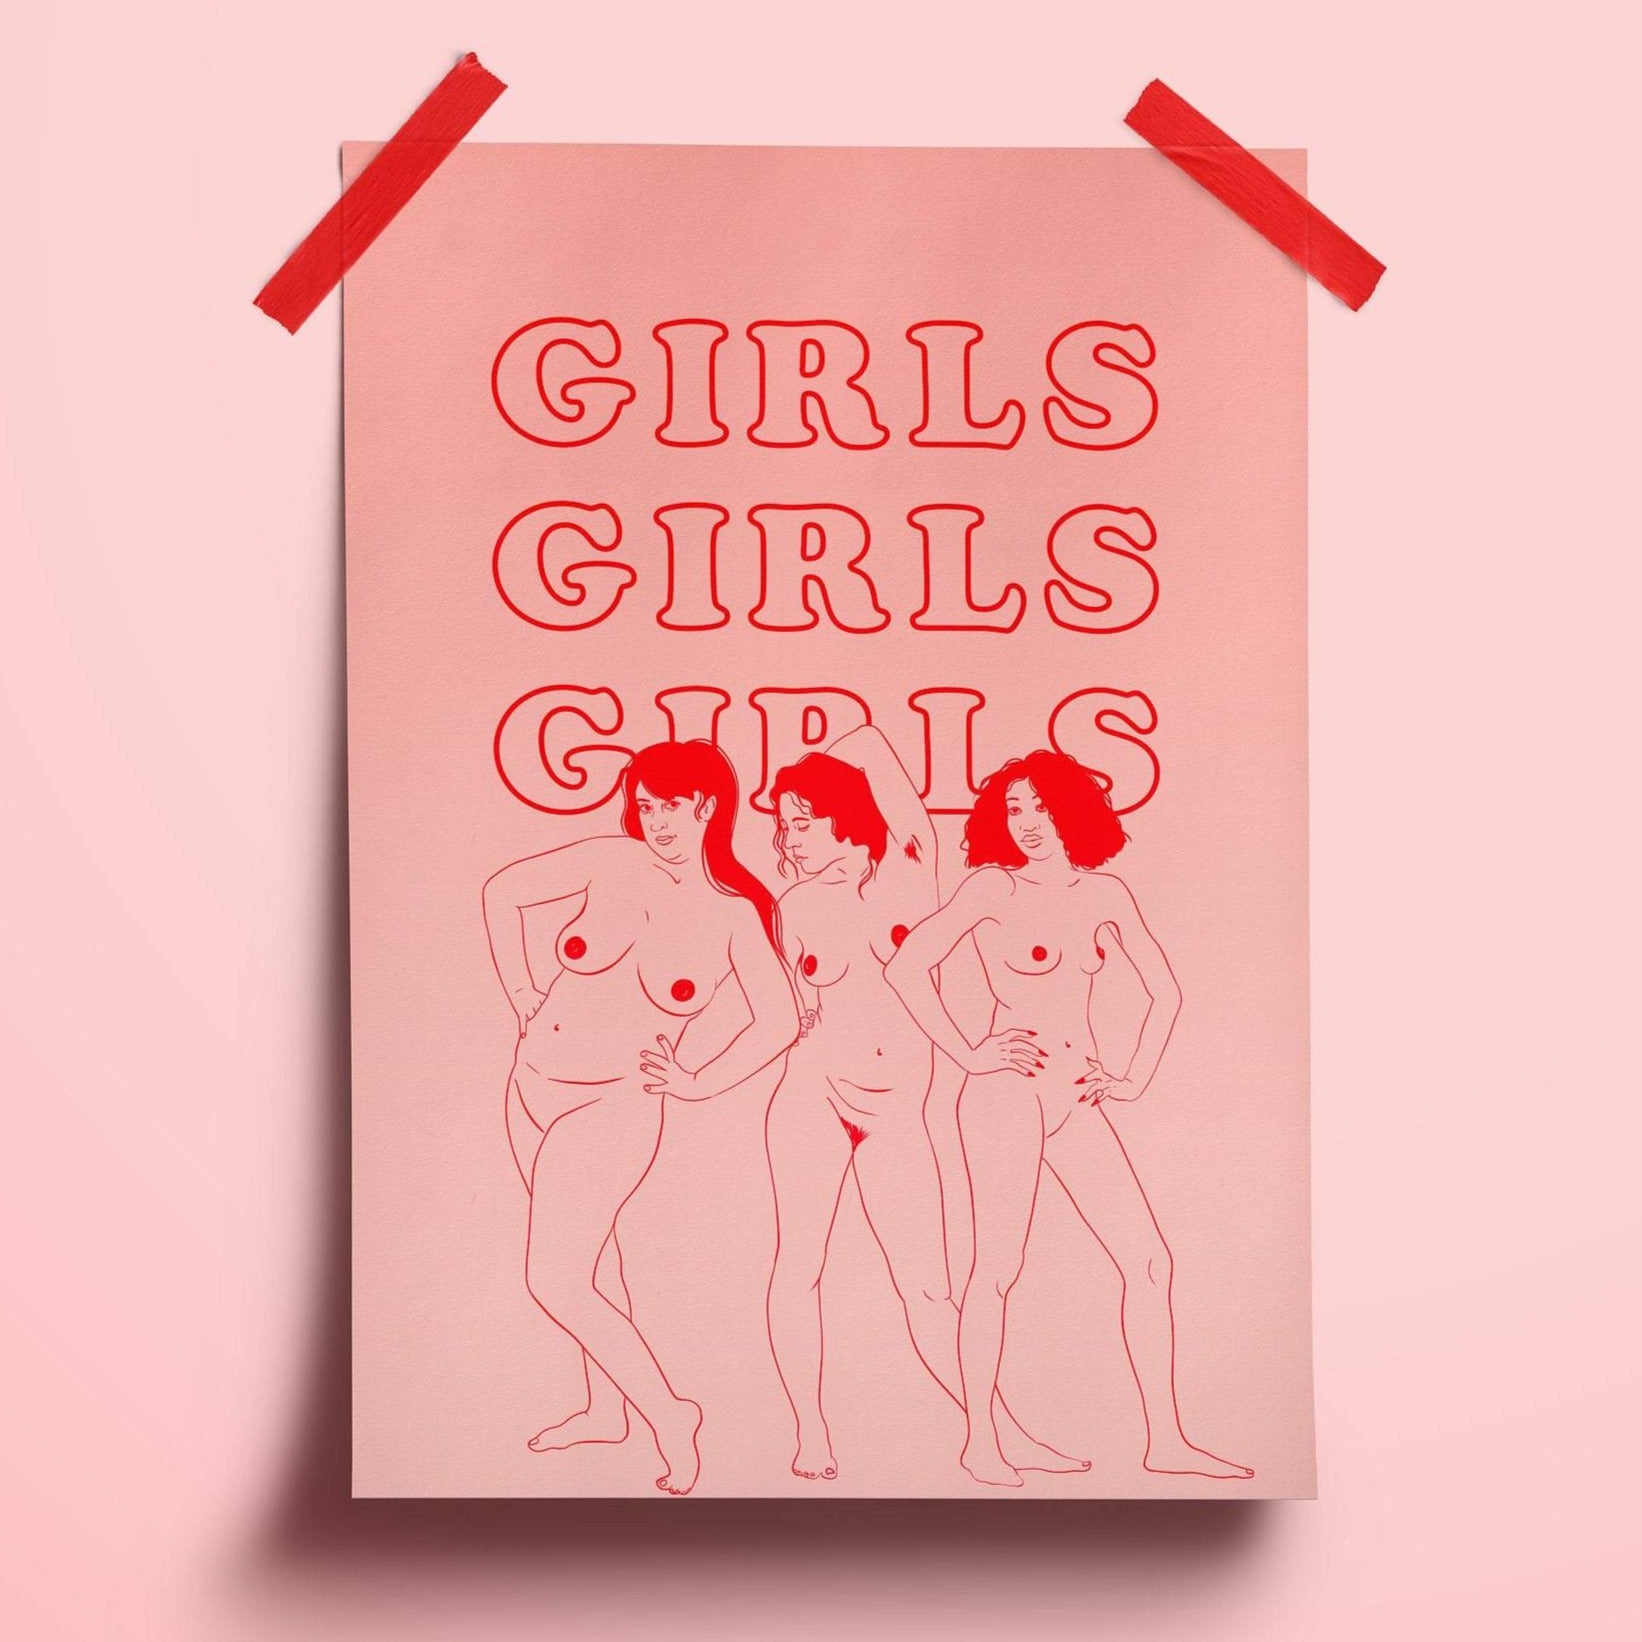 illustration print of three diverse nude women stood together in various poses in red linework. behind them are the words 'girls girls girls' and the background is a medium pink.